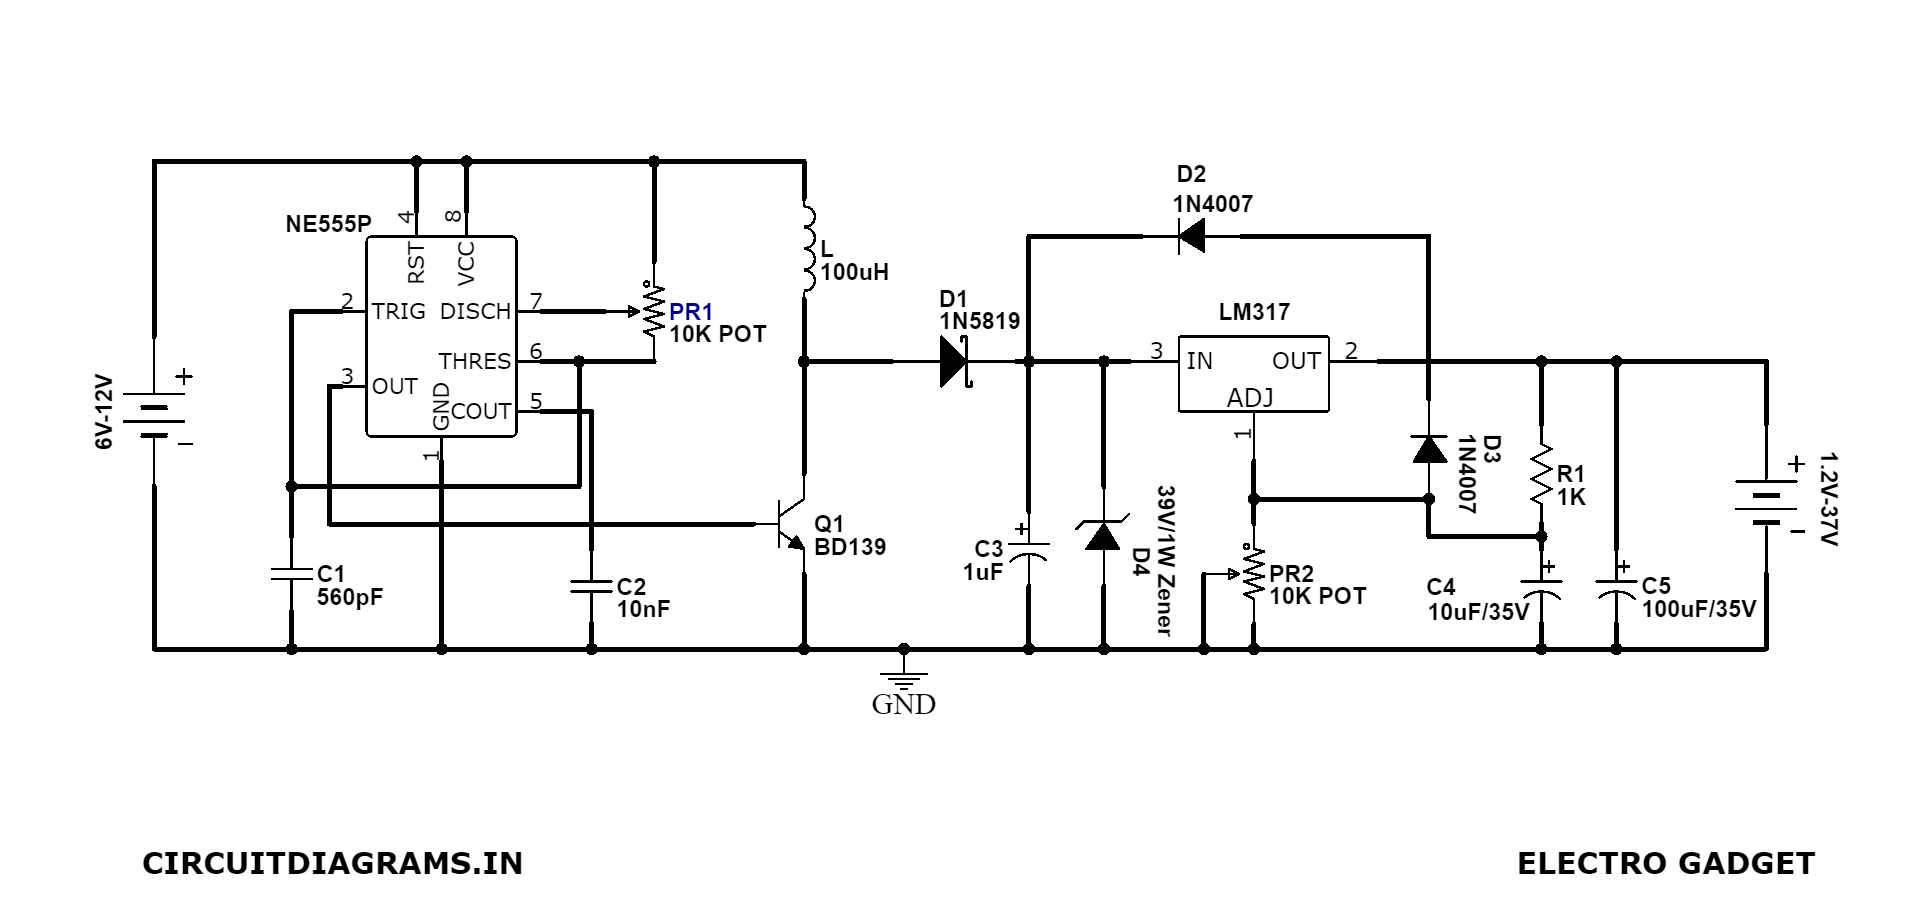 https://circuitdiagrams.in/wp-content/uploads/2022/05/DC-To-DC-Boost-Converter-Circuit-Diagram.png